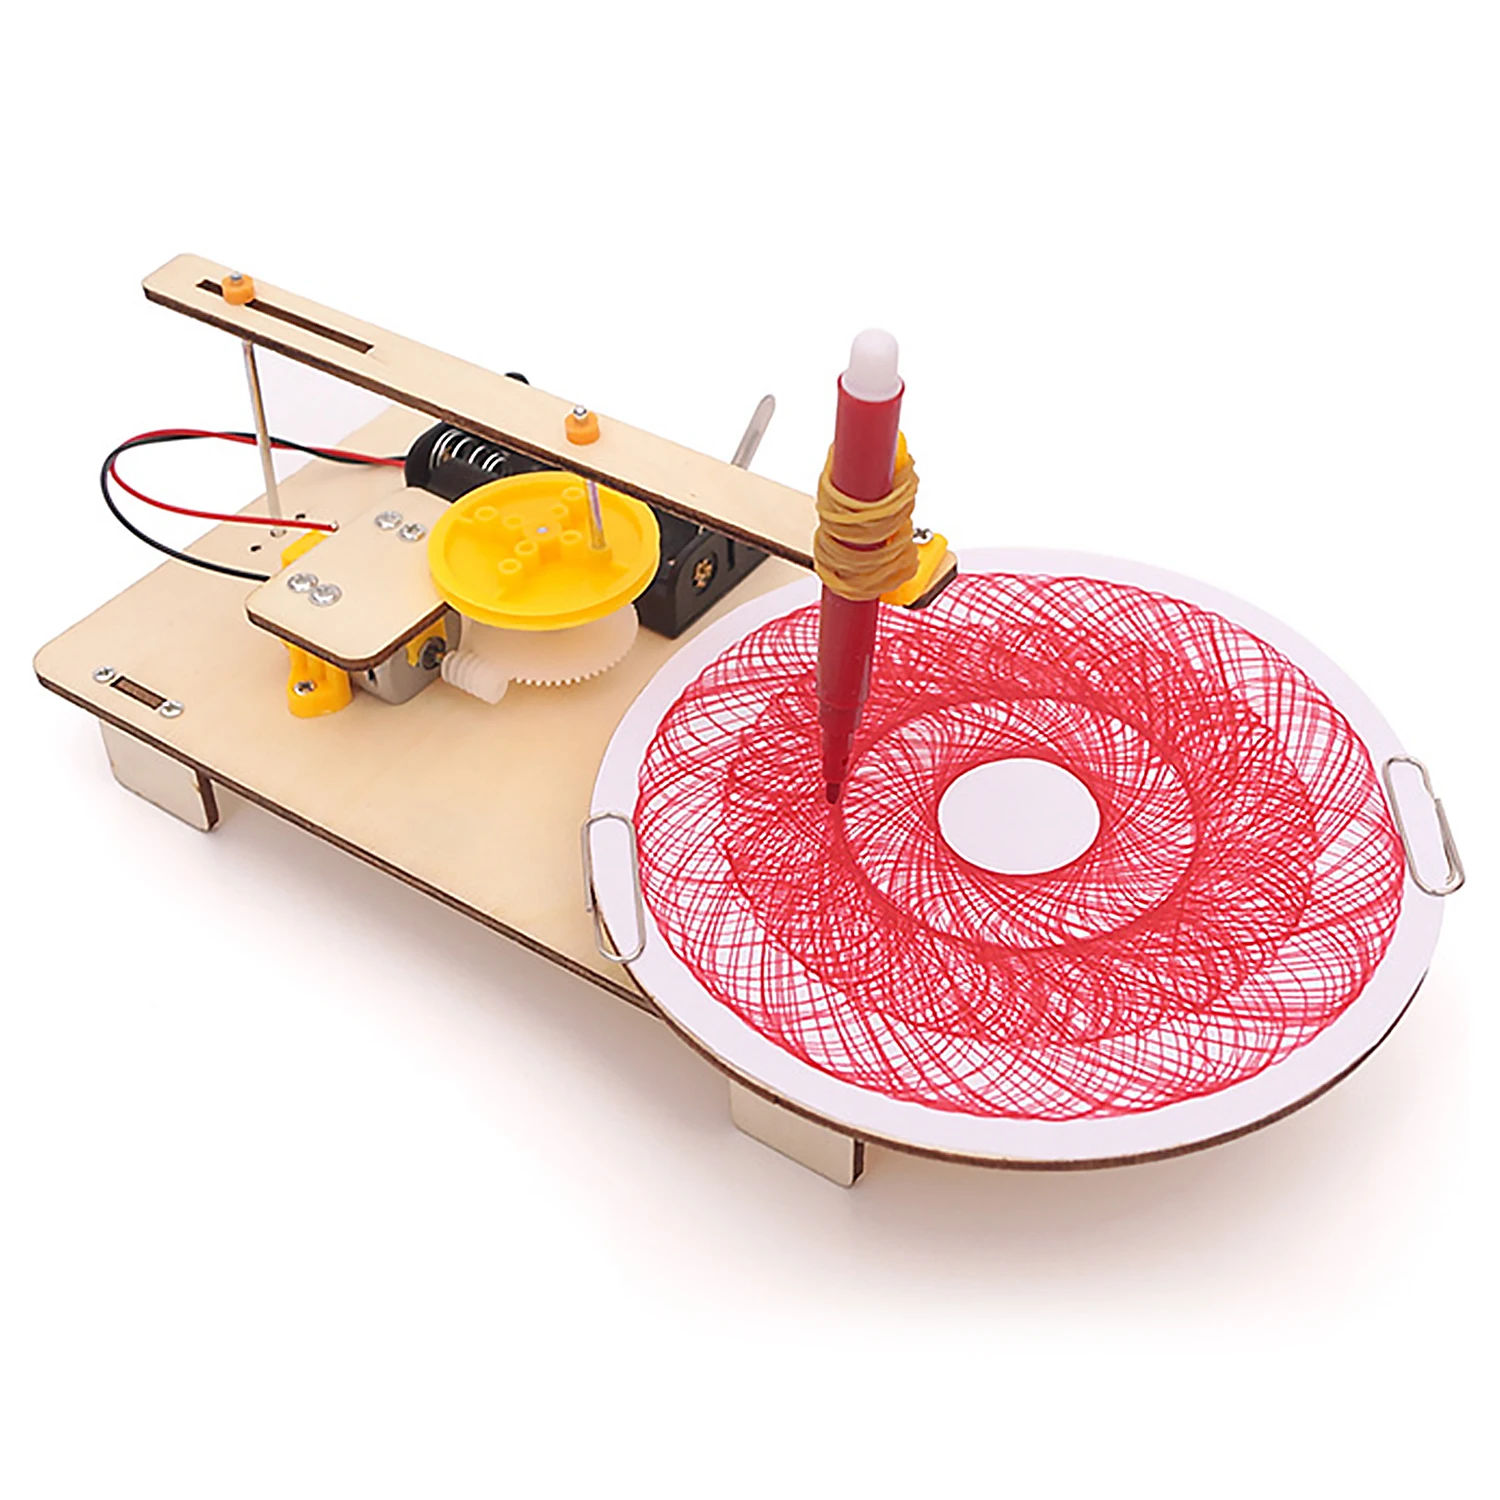 Kids Fun Wooden DIY Assembled Electric Plotter Model Kit Creative Drawing Robot Physics Scientific Experiment Educational Toy